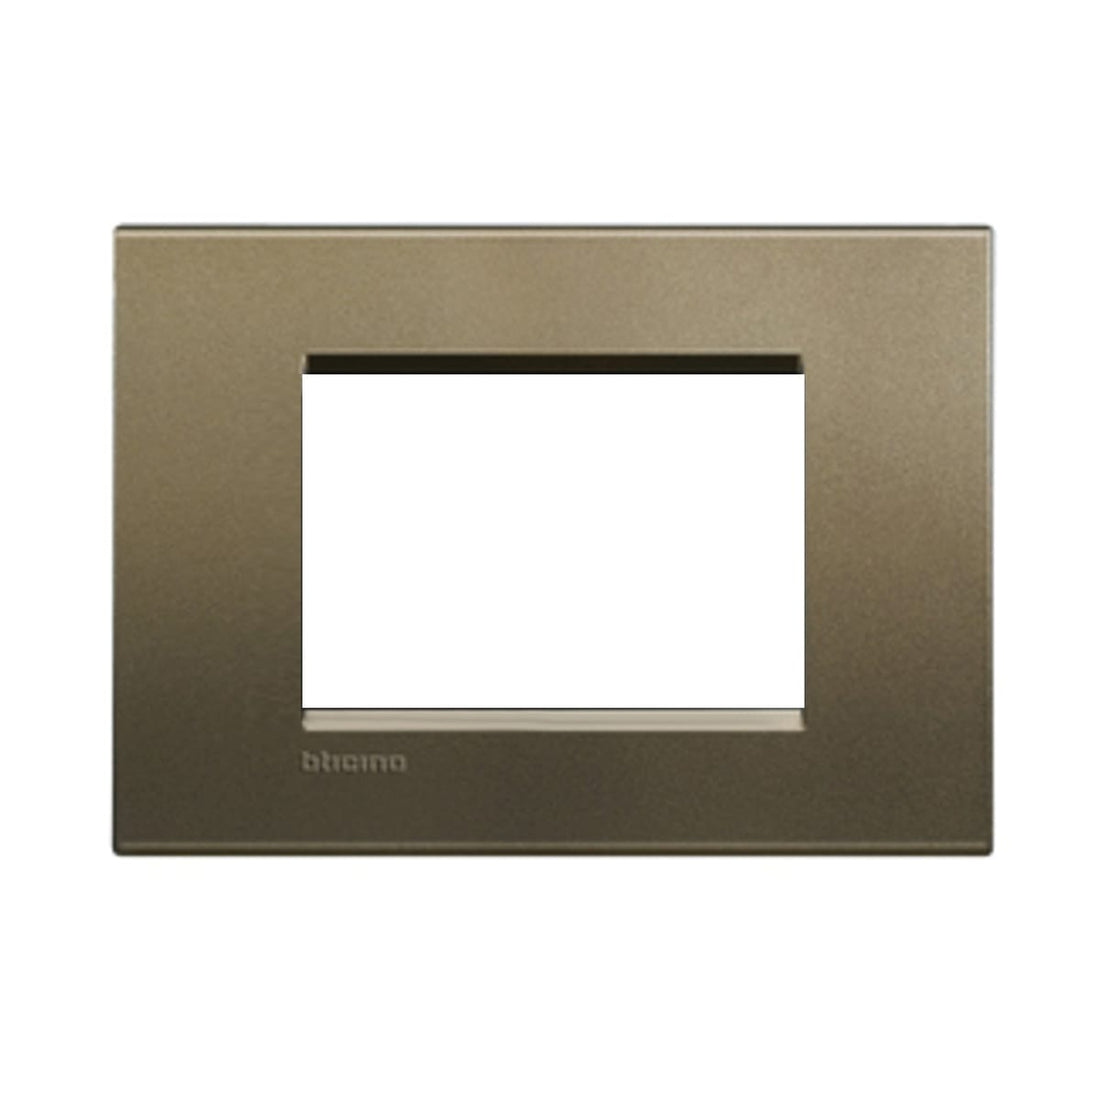 LIVING LIGHT SQUARE 3 PLACE PLATE GREY